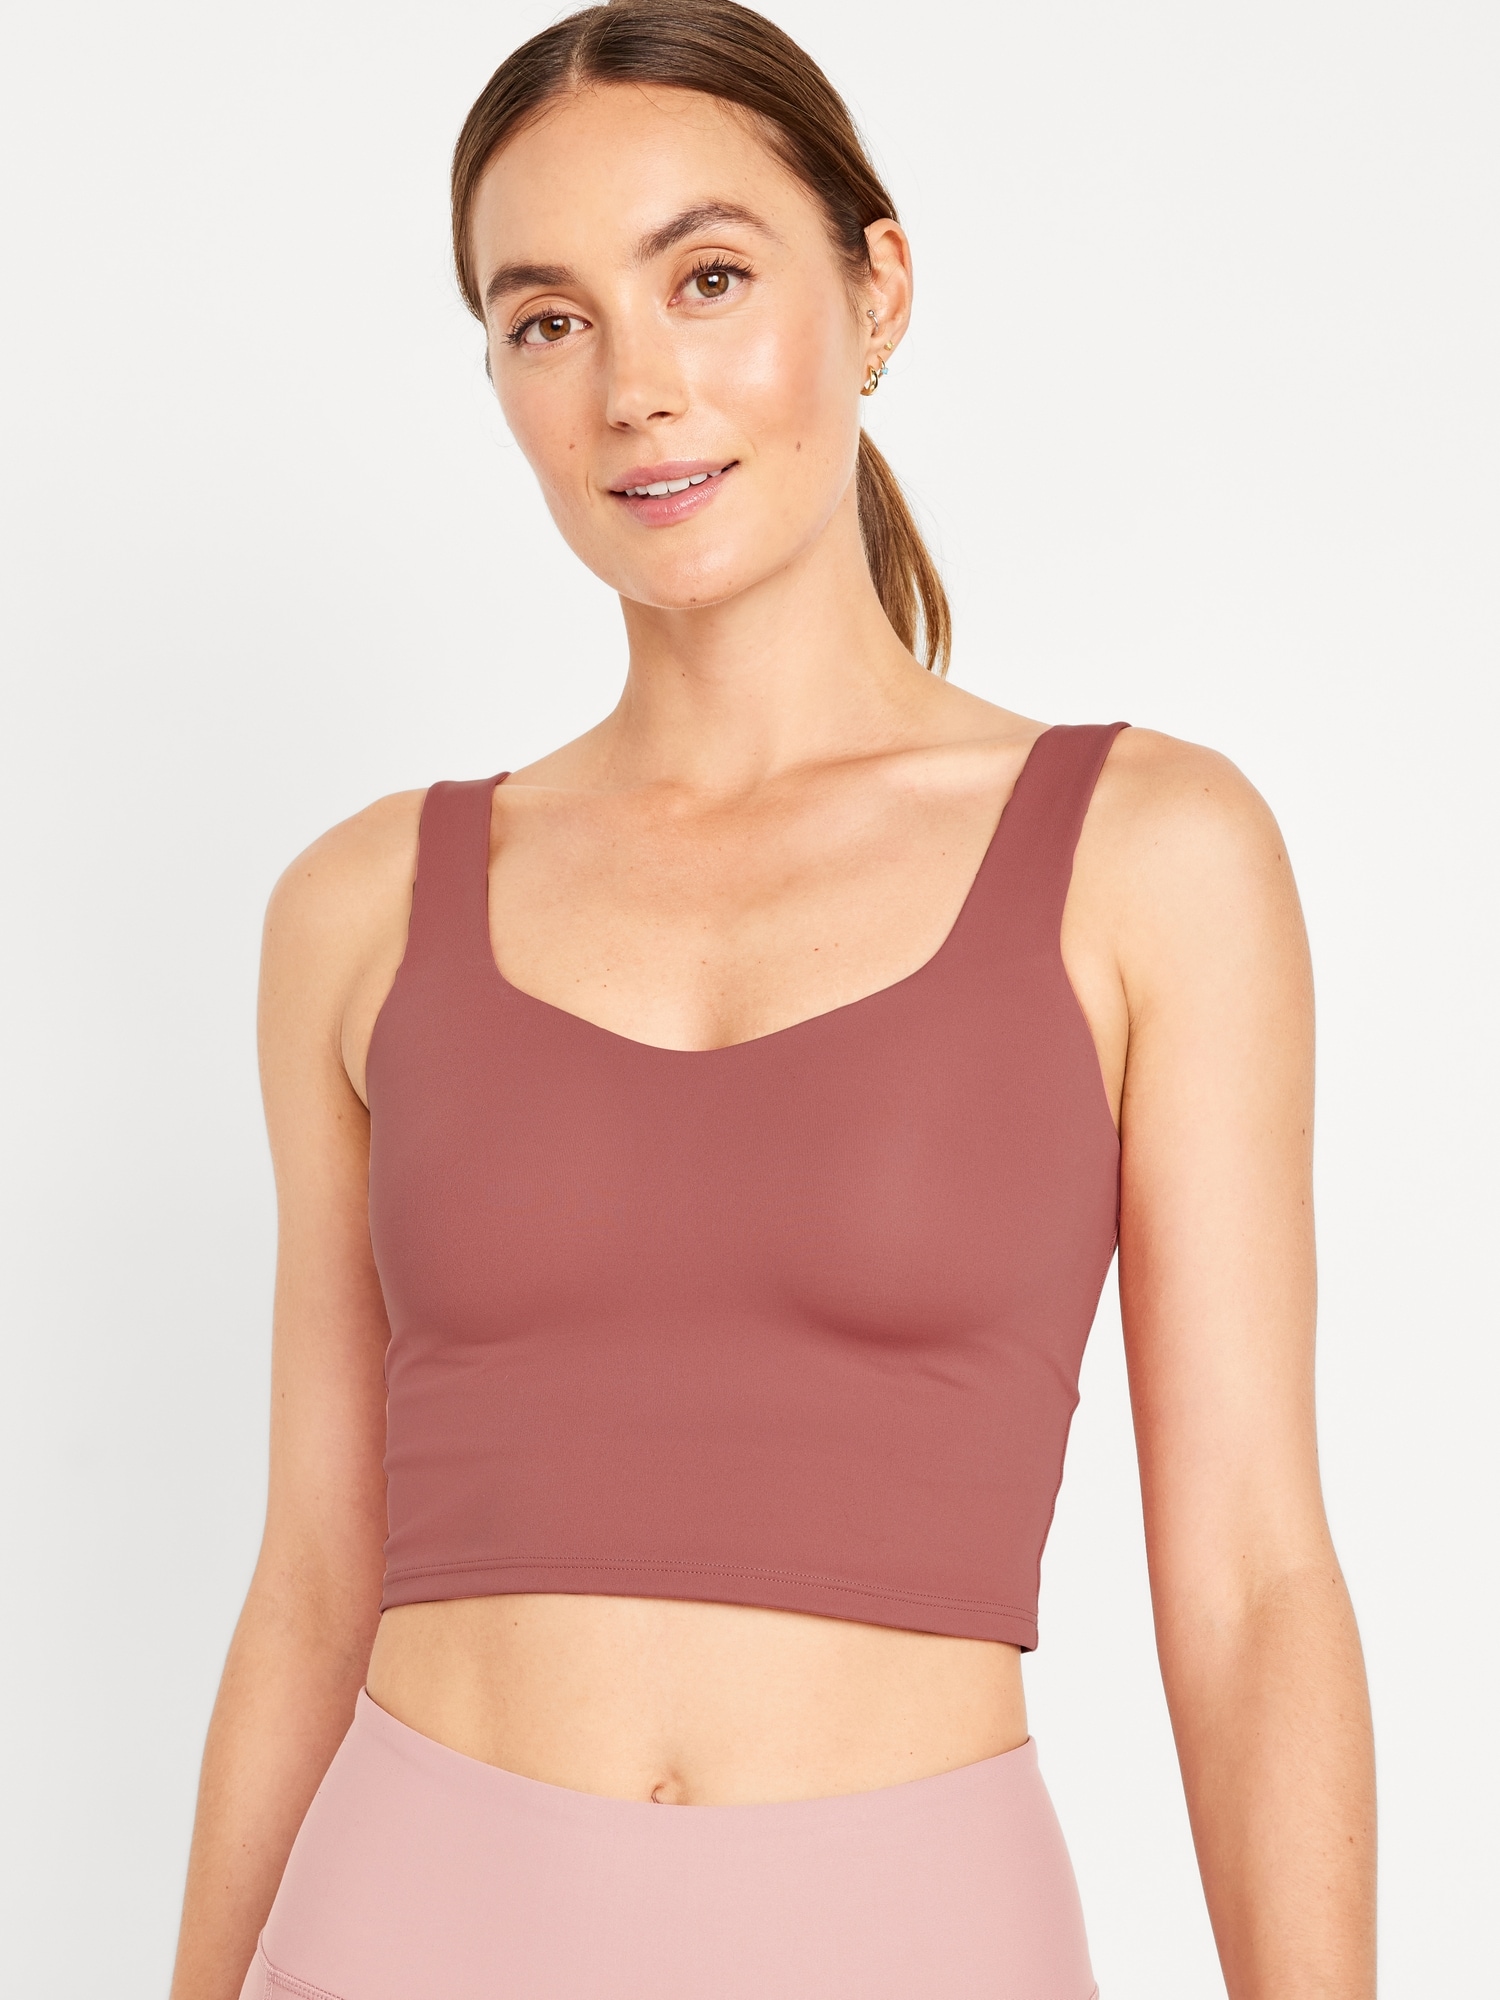 Workout Tanks with Built-in Bra